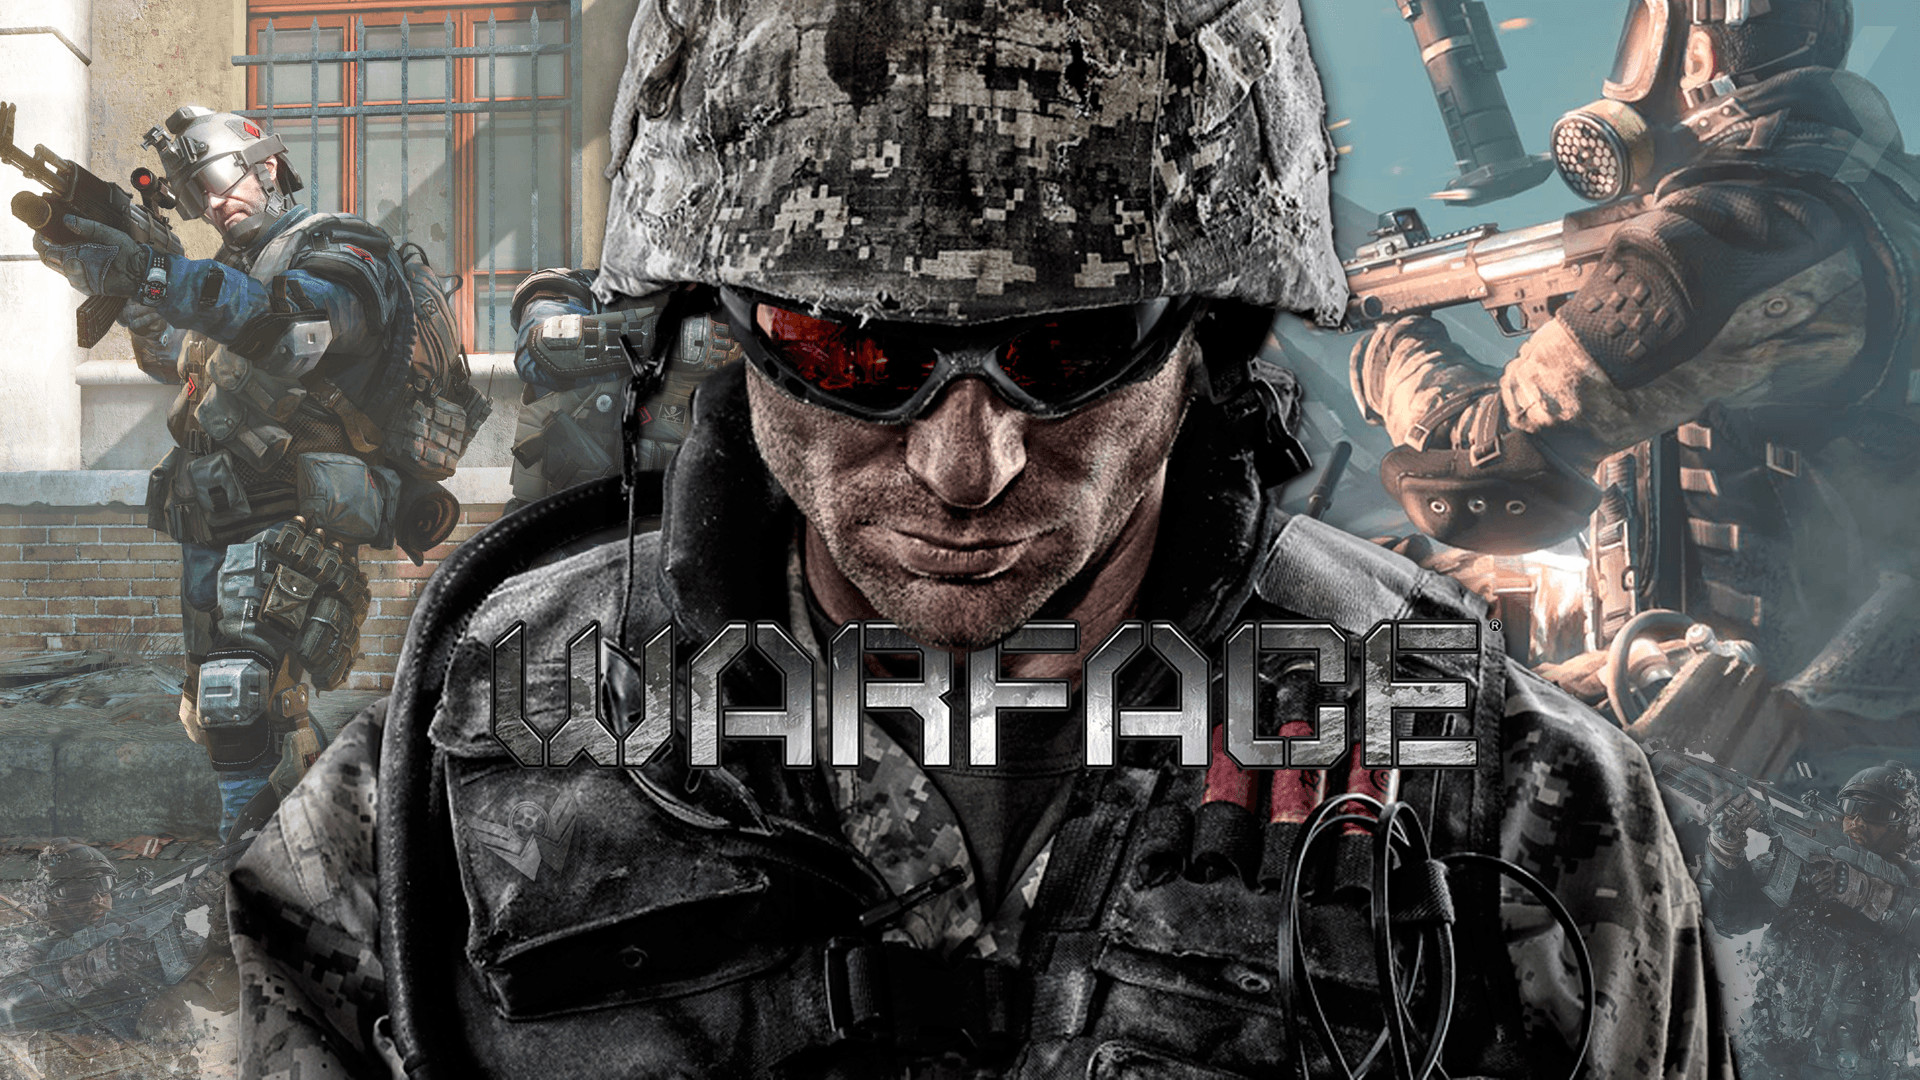 warface wallpapers,soldier,people,army,military camouflage,military